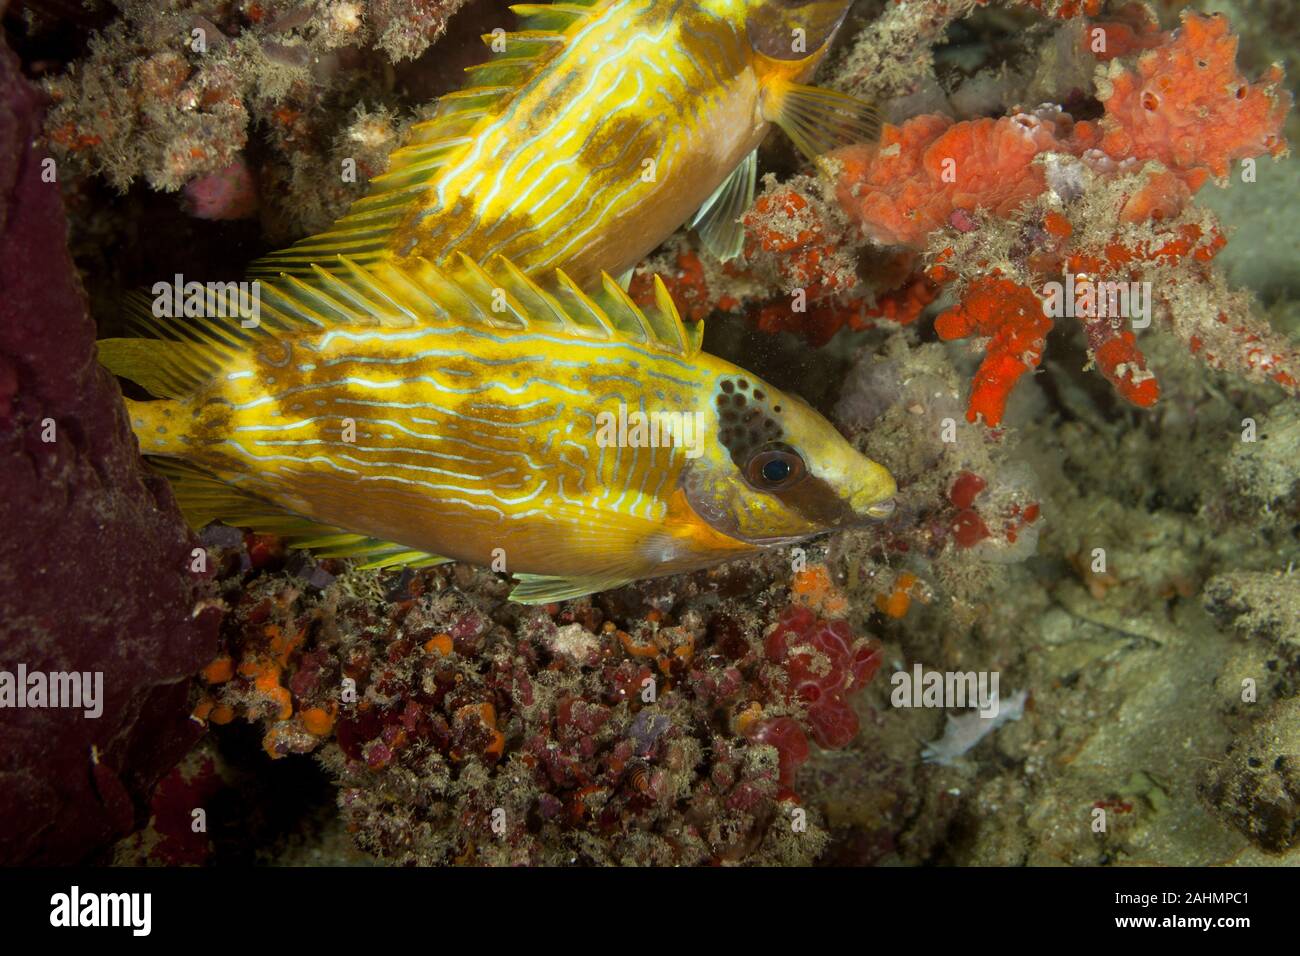 Masked spinefoot, Siganus puellus, also known as decorated rabbitfish or masked rabbitfish Stock Photo